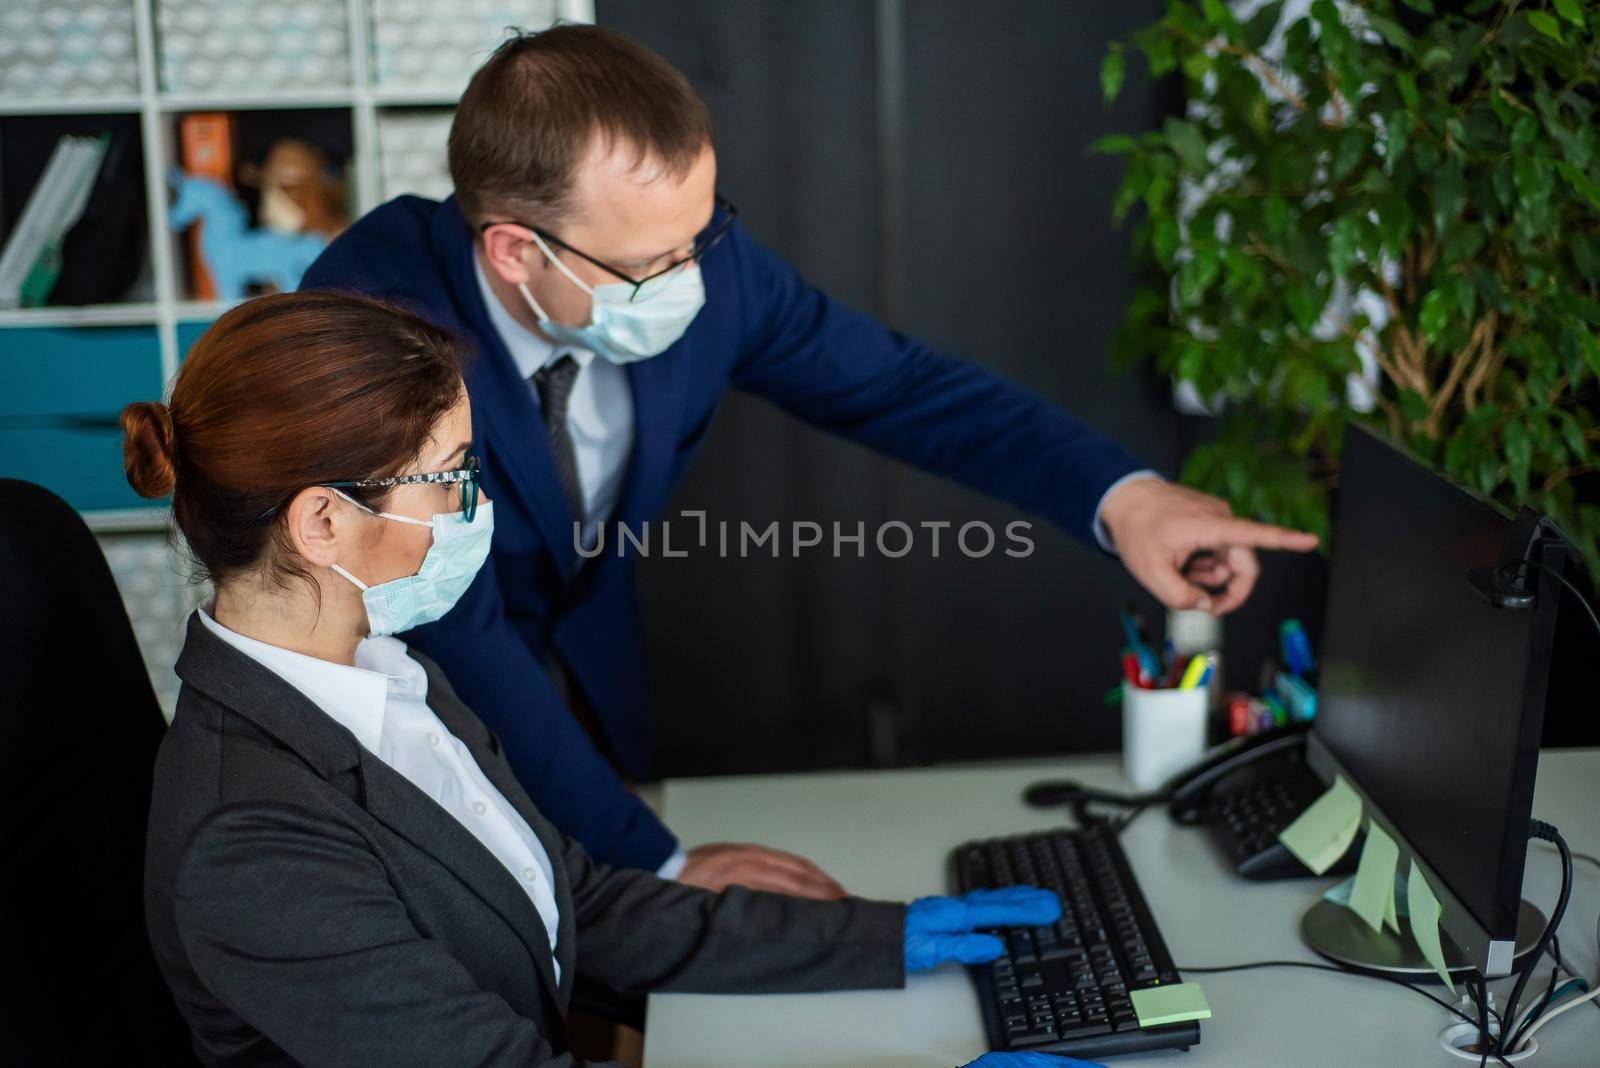 Colleagues in surgical masks in an open office space communicate at the work desk. A male top manager teaches a female intern how to work at a computer. The boss directs the subordinate